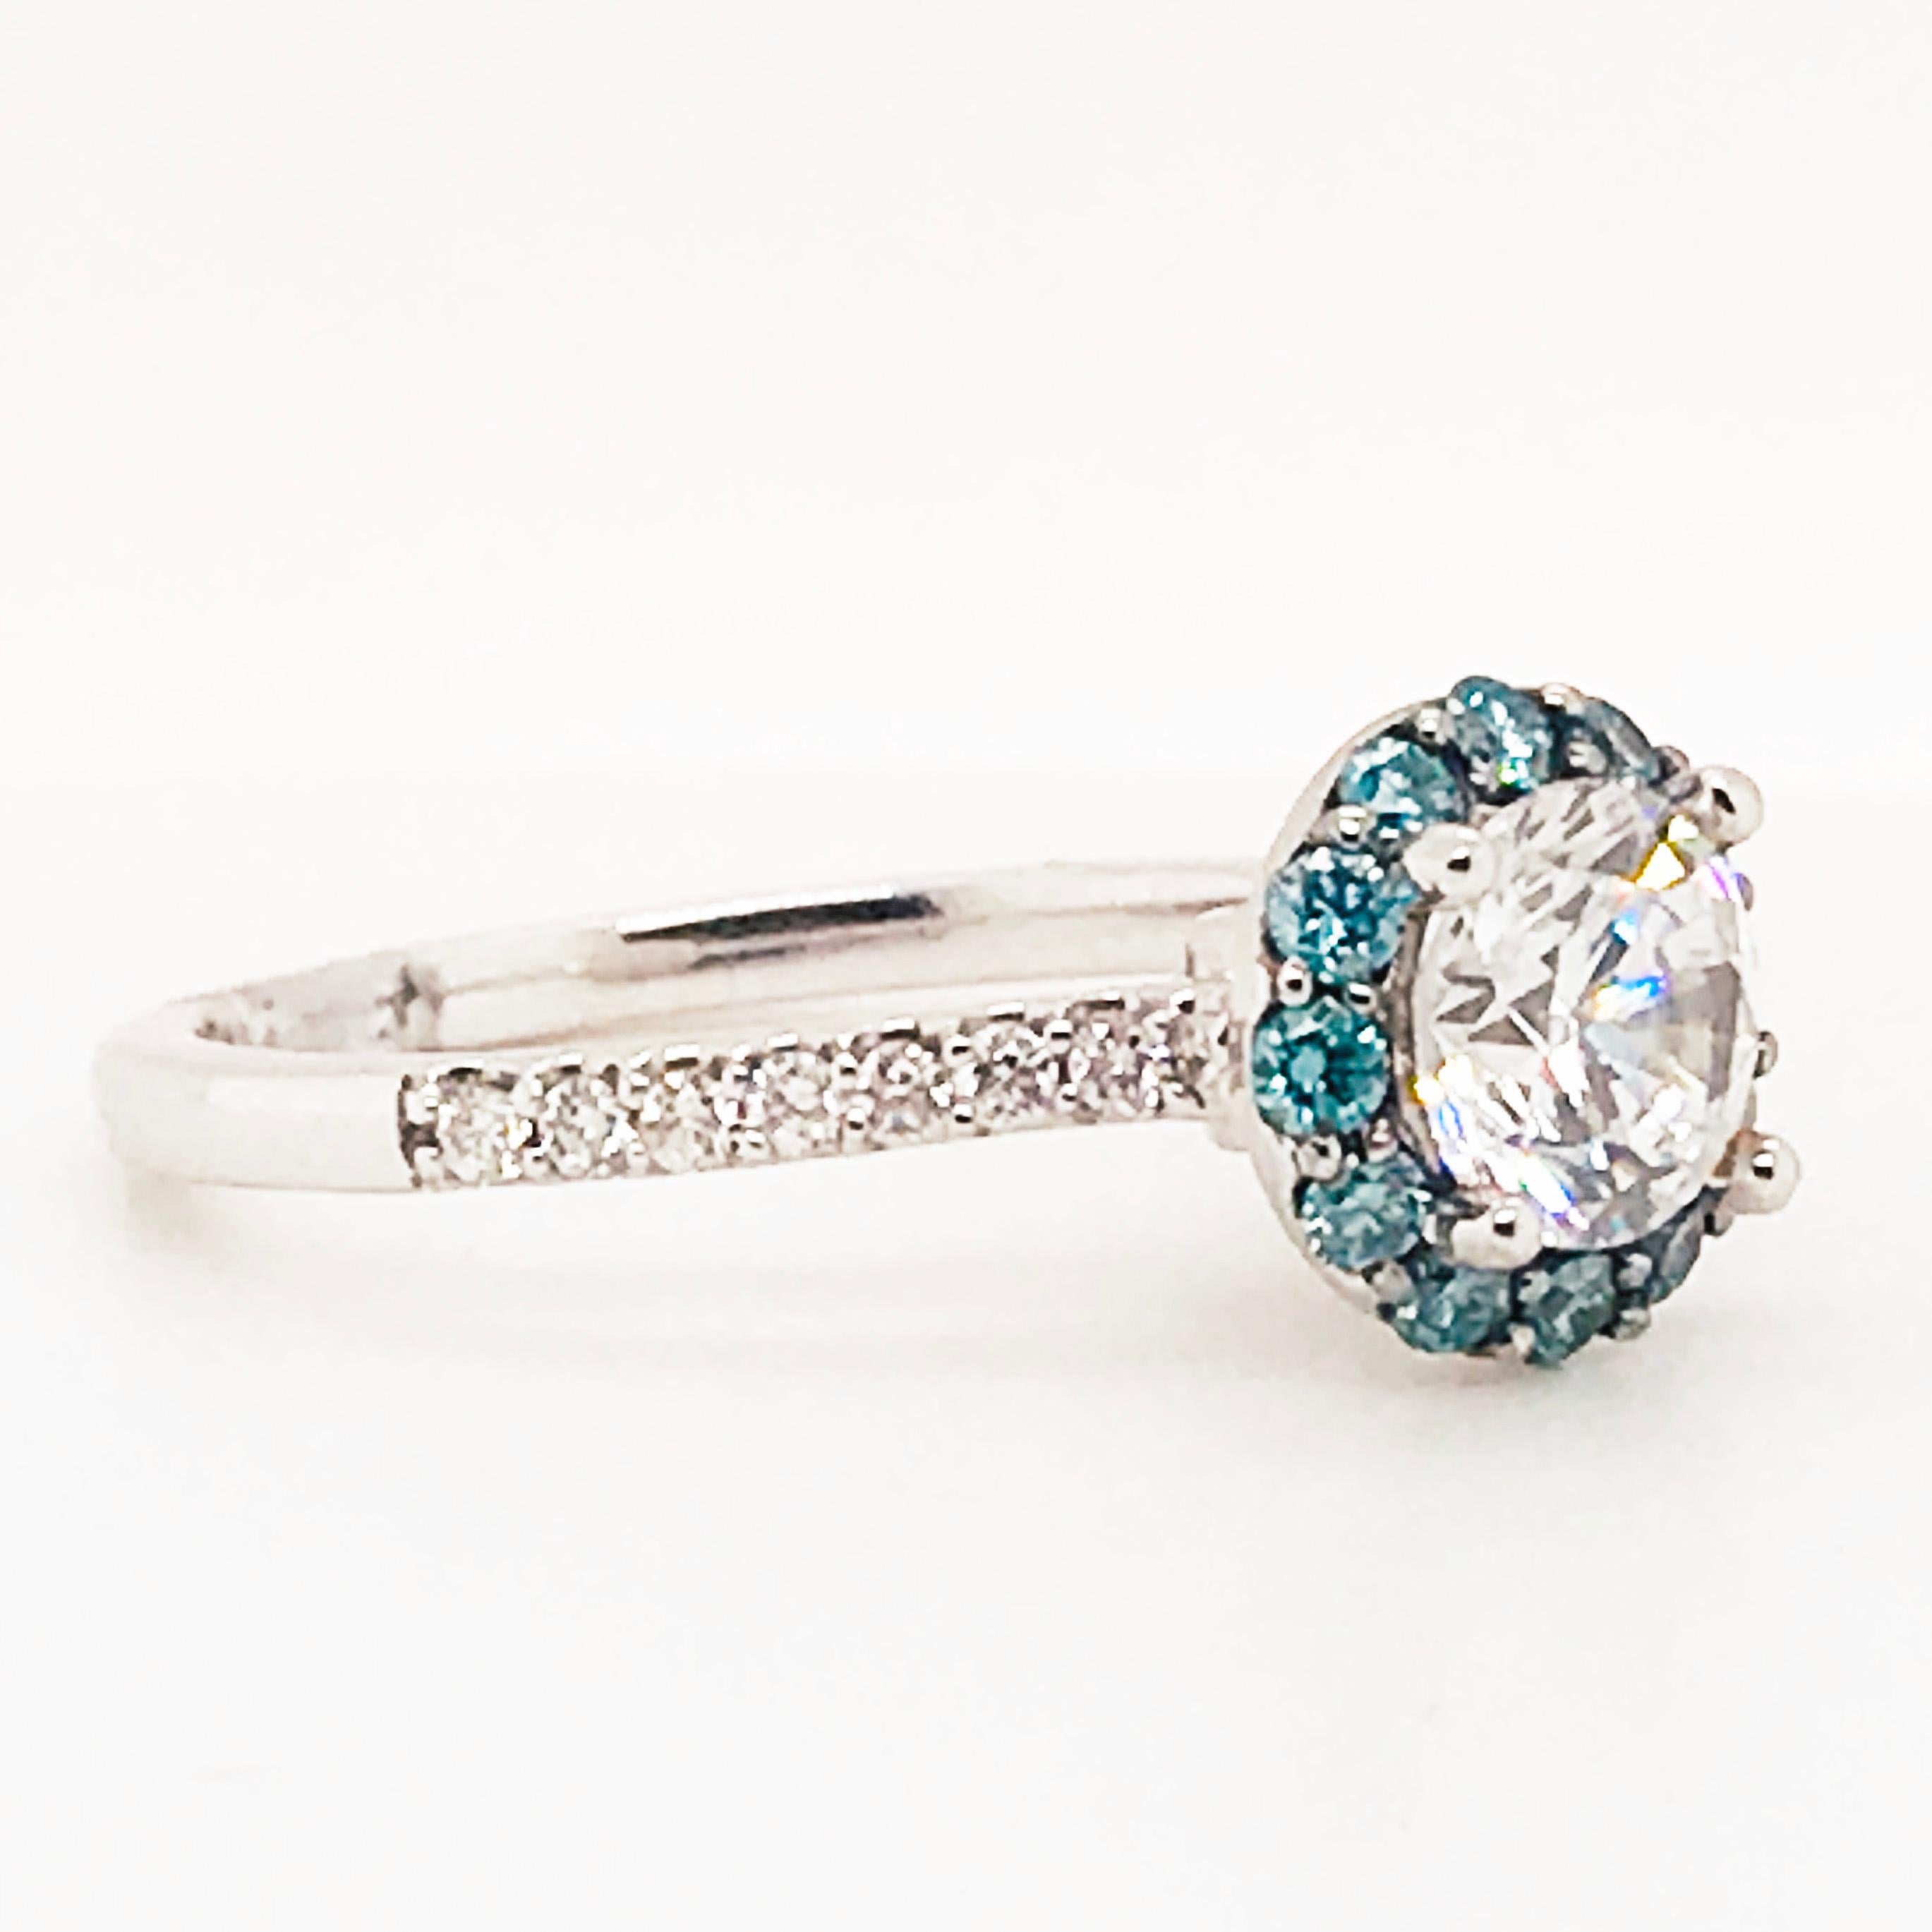 blue diamond solitaire ring